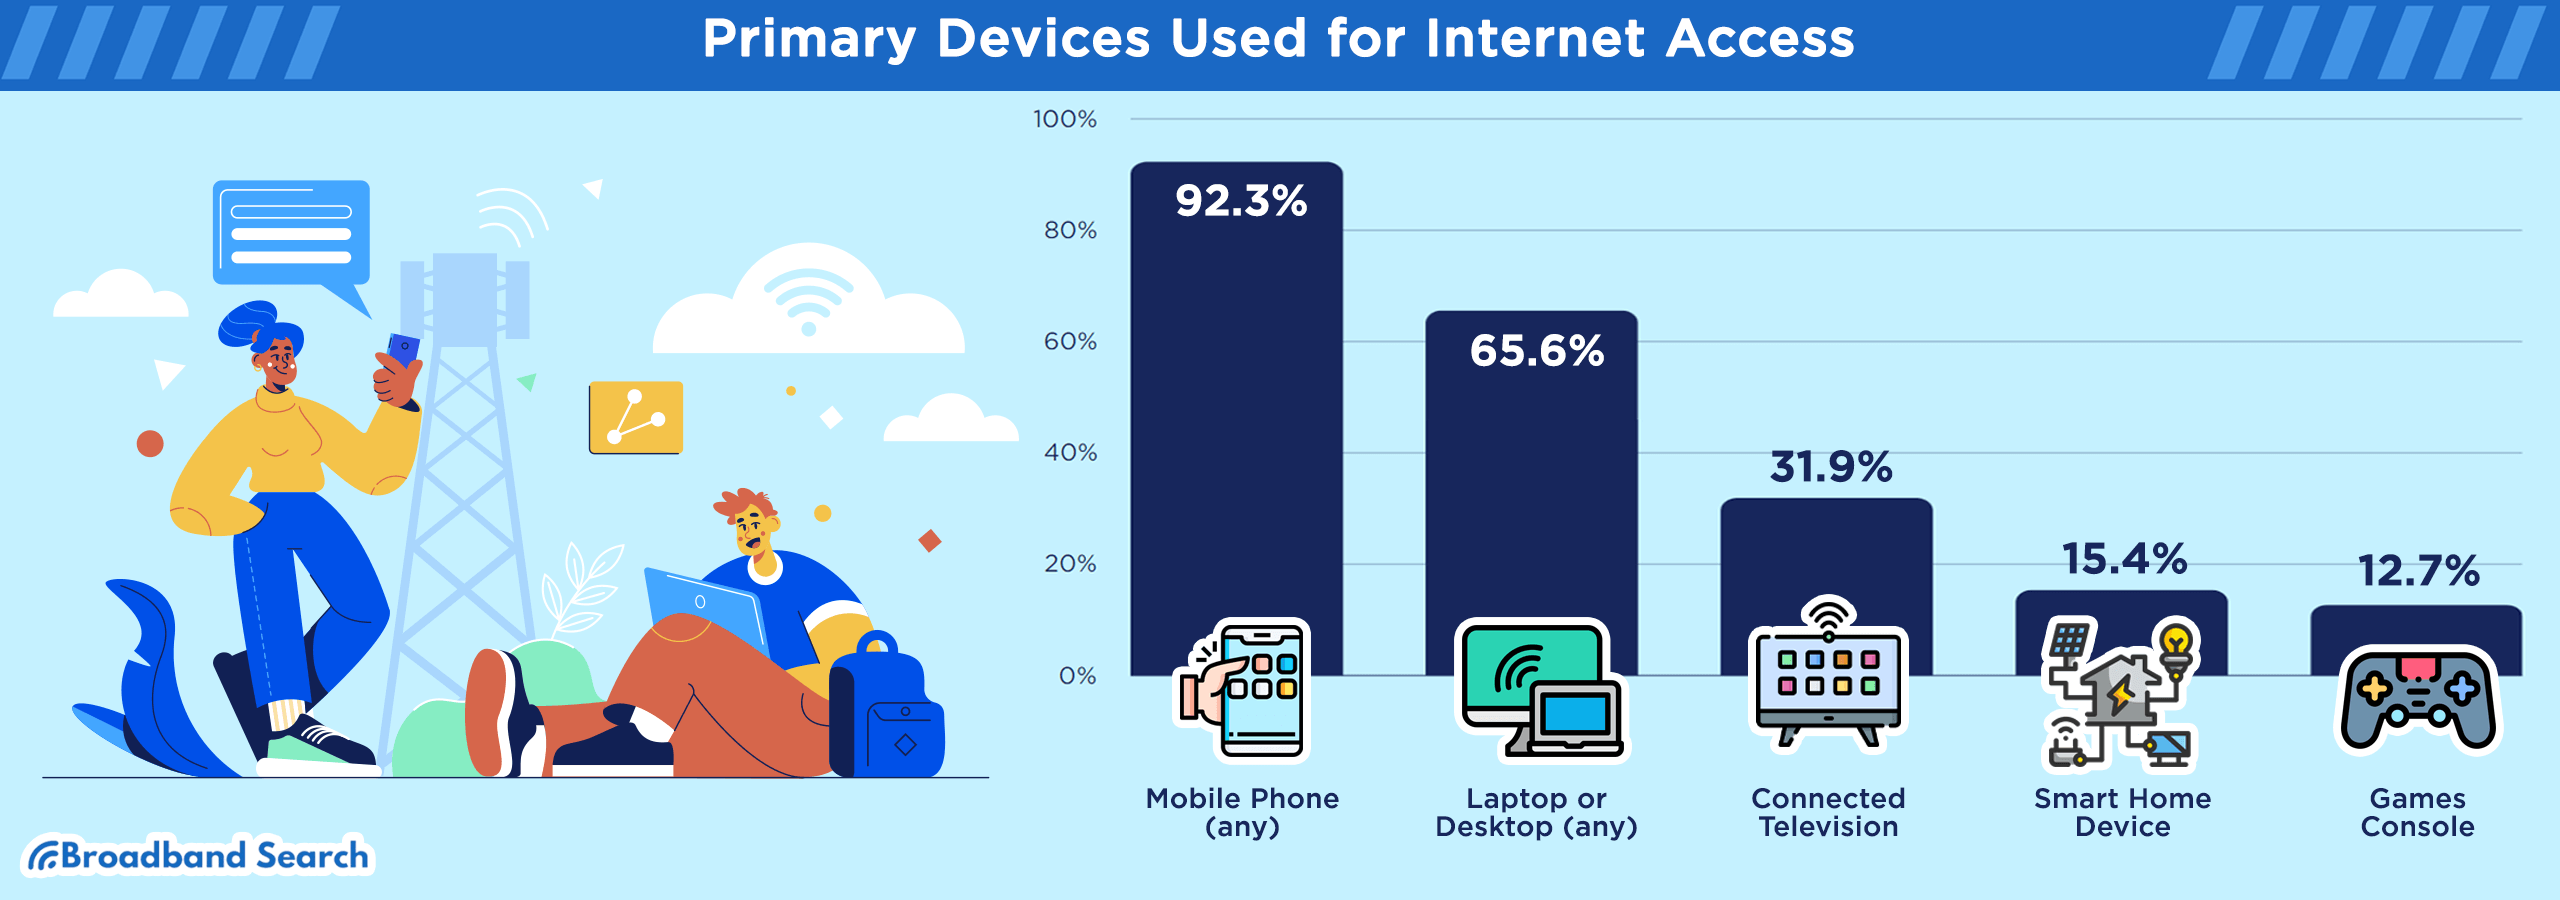 Primary devices used for internet access